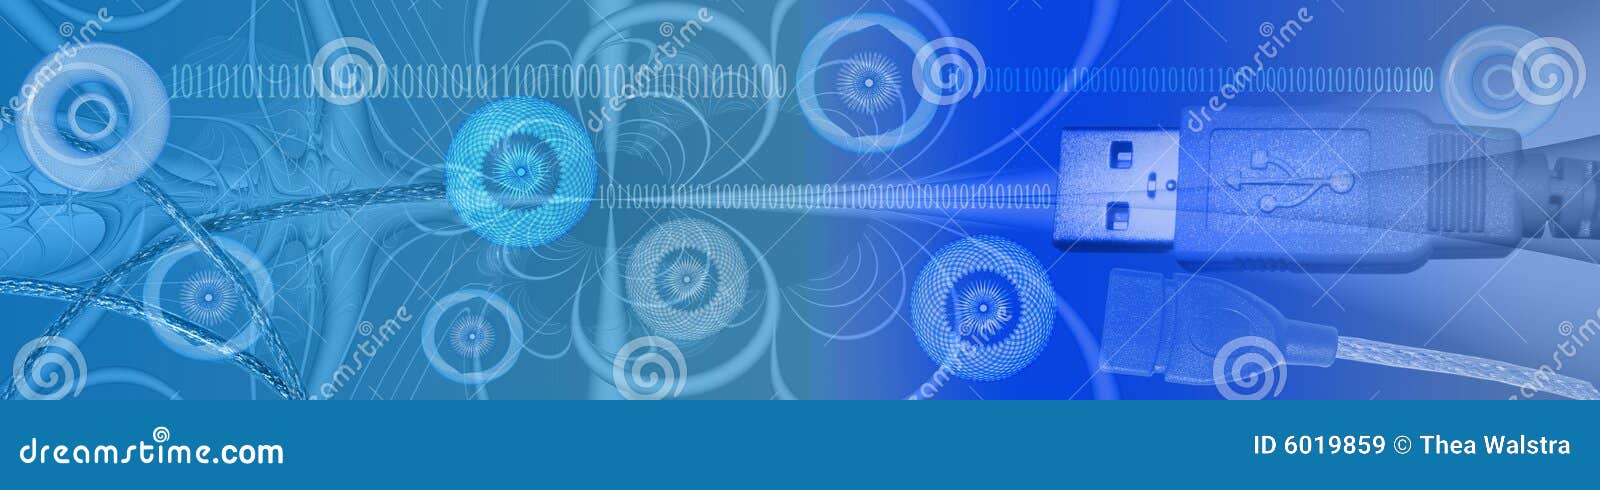 This banner / header has an abstract background with wire-like shapes. This and the circles (with beautiful graphic patterns), binary codes, cables and the usb is symbolic for Technology and connections.